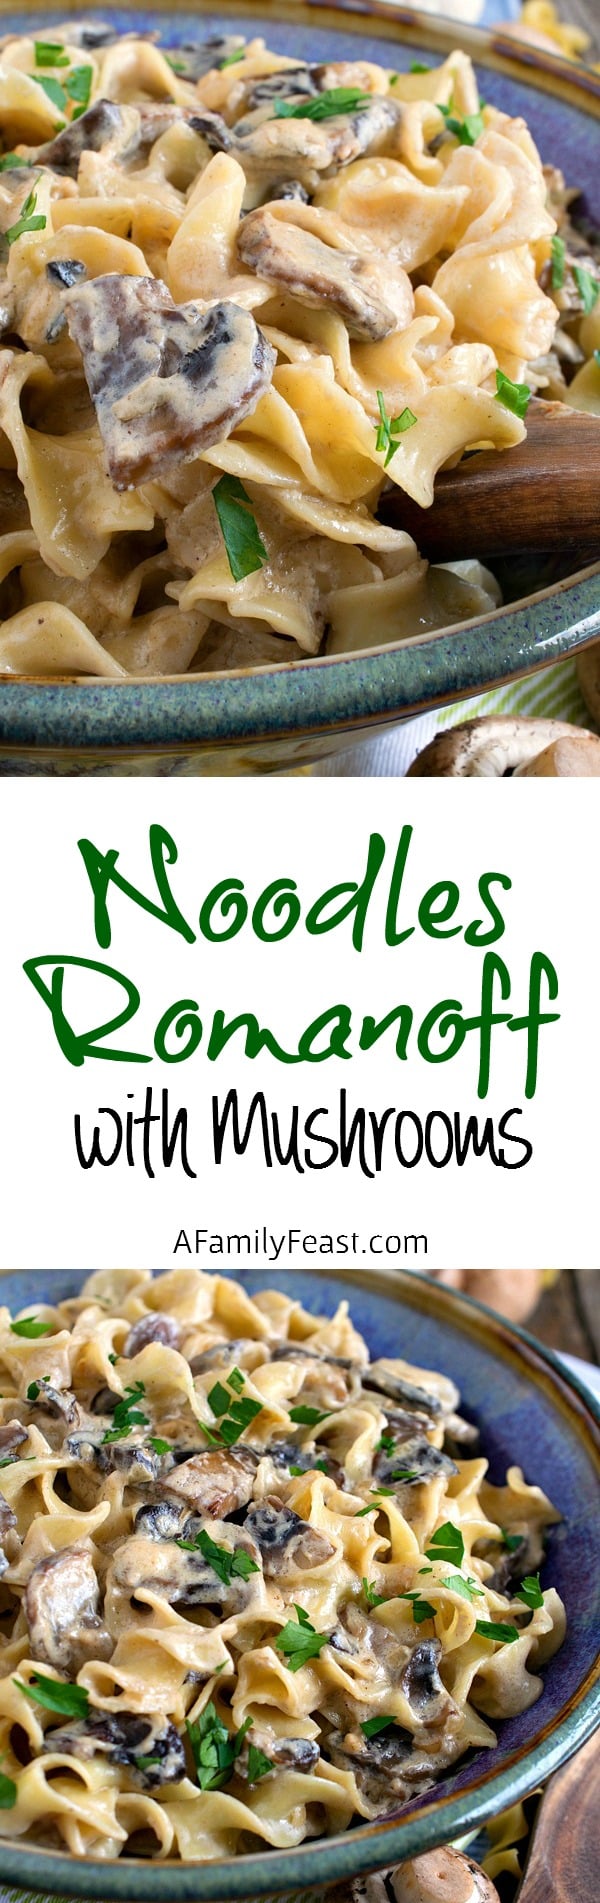 Noodles Romanoff with Mushrooms - A modern update on the classic Noodles Romanoff dish. Delicious and creamy!